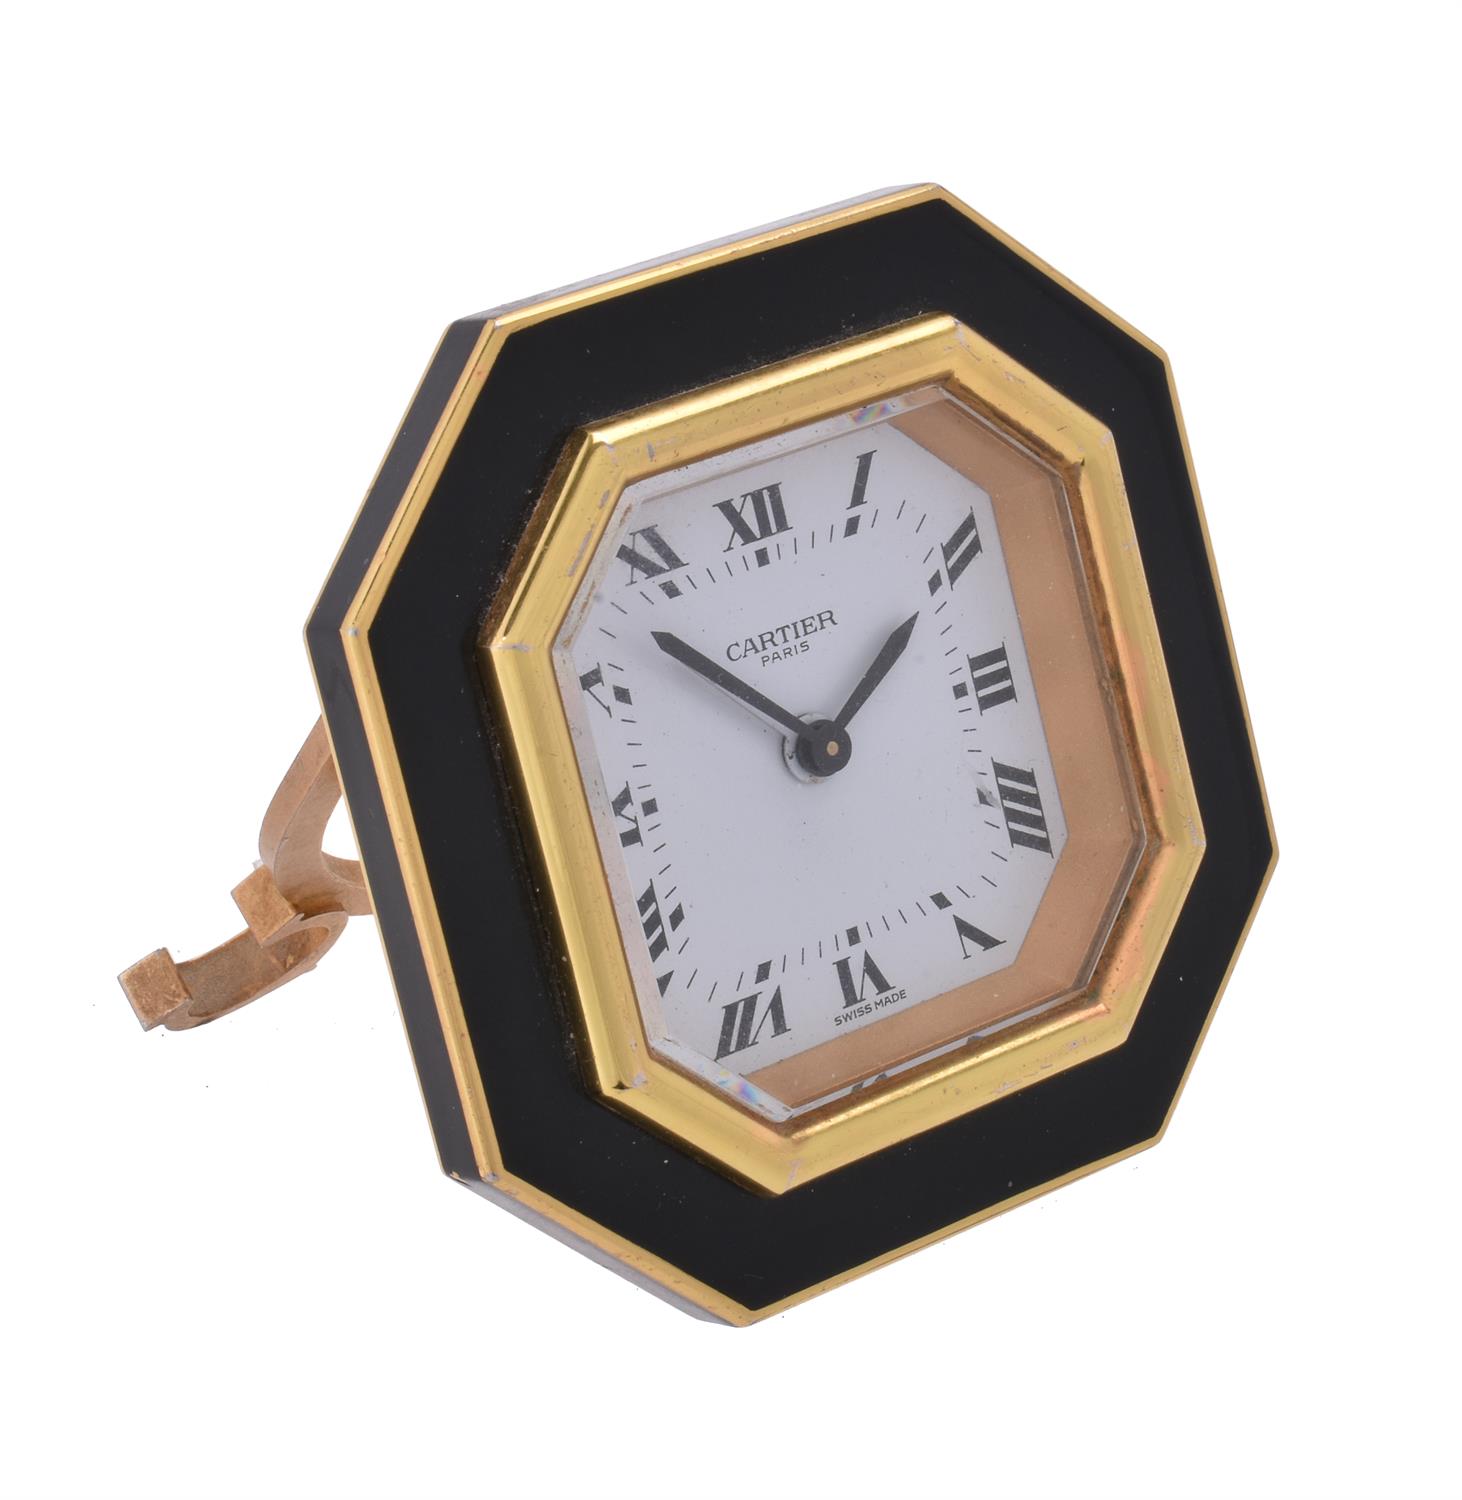 Cartier, gilt and lacquer alarm clock - Image 4 of 4